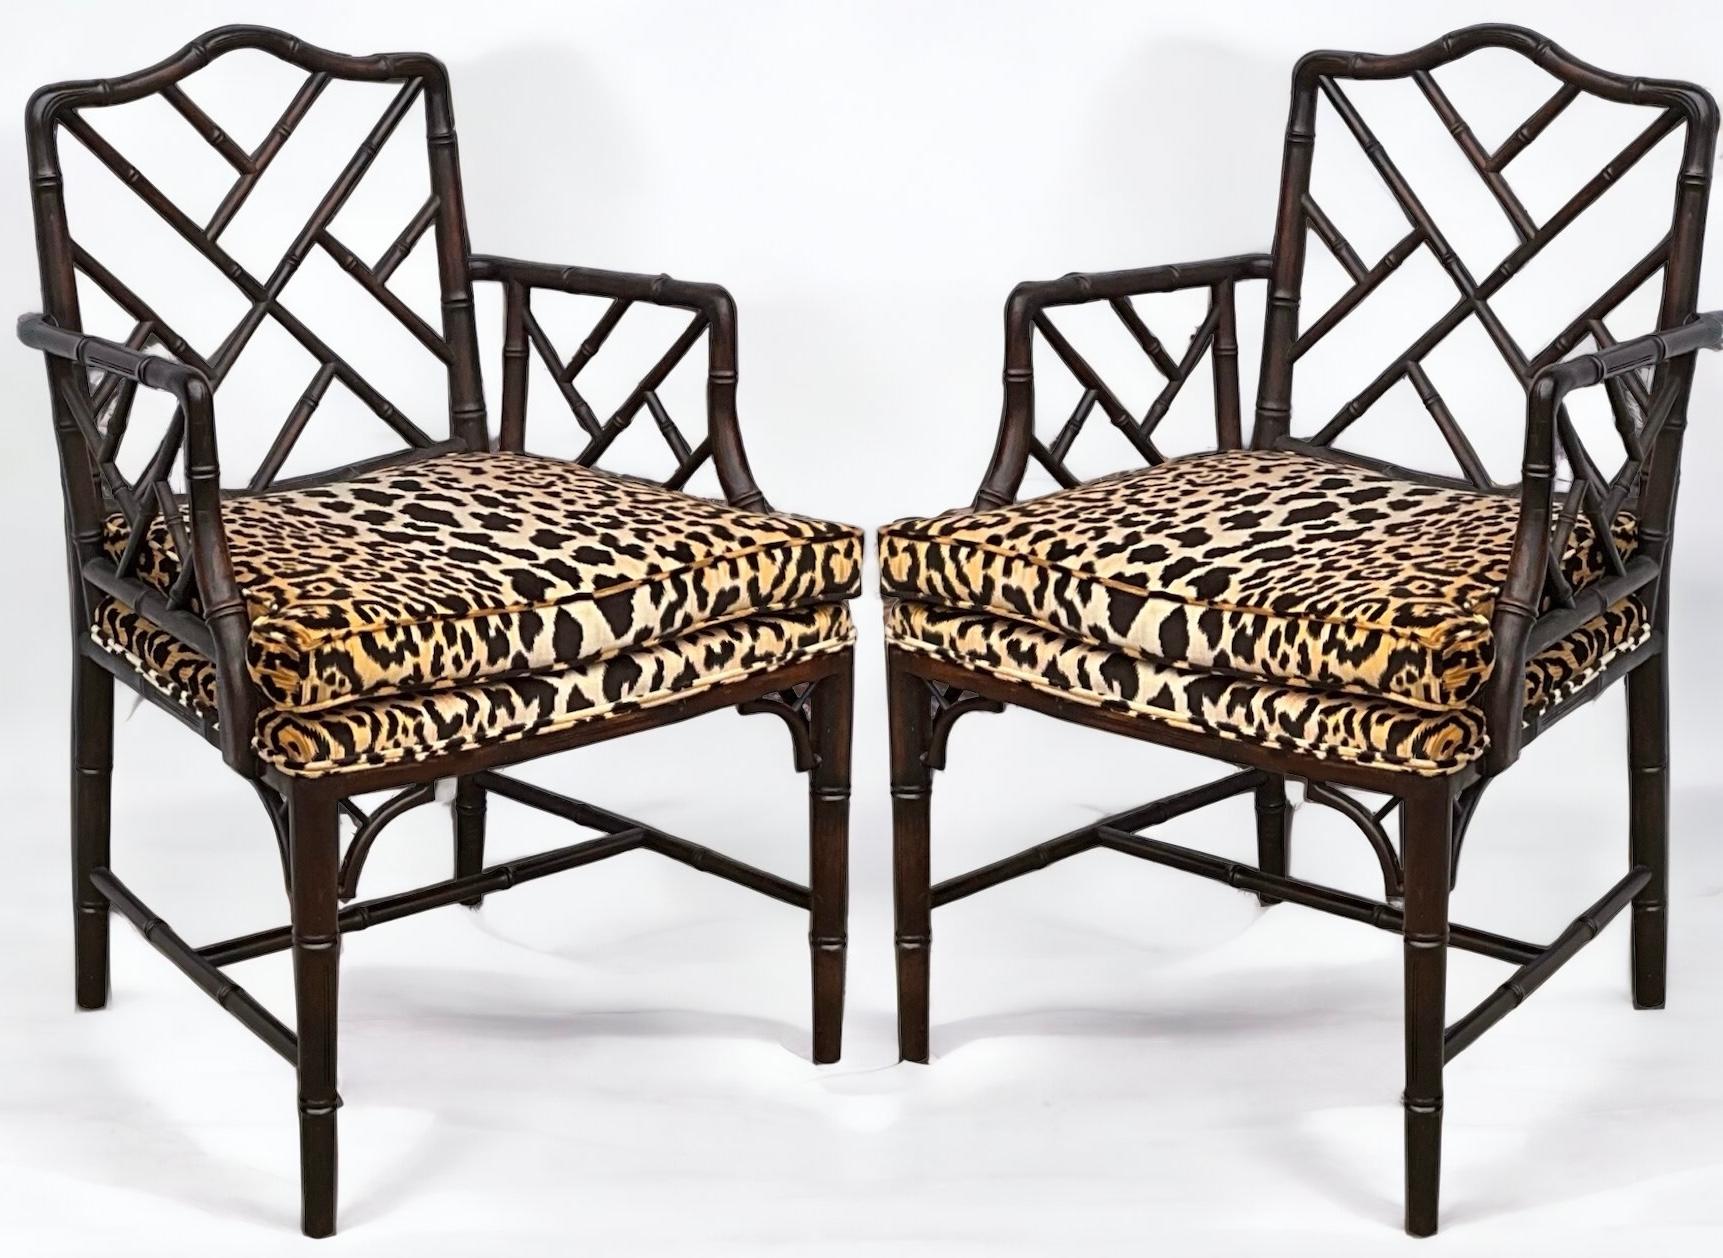 Regency Chinese Chippendale Style Faux Bamboo Arm Chairs In Velvet Leopard -Pair For Sale 5